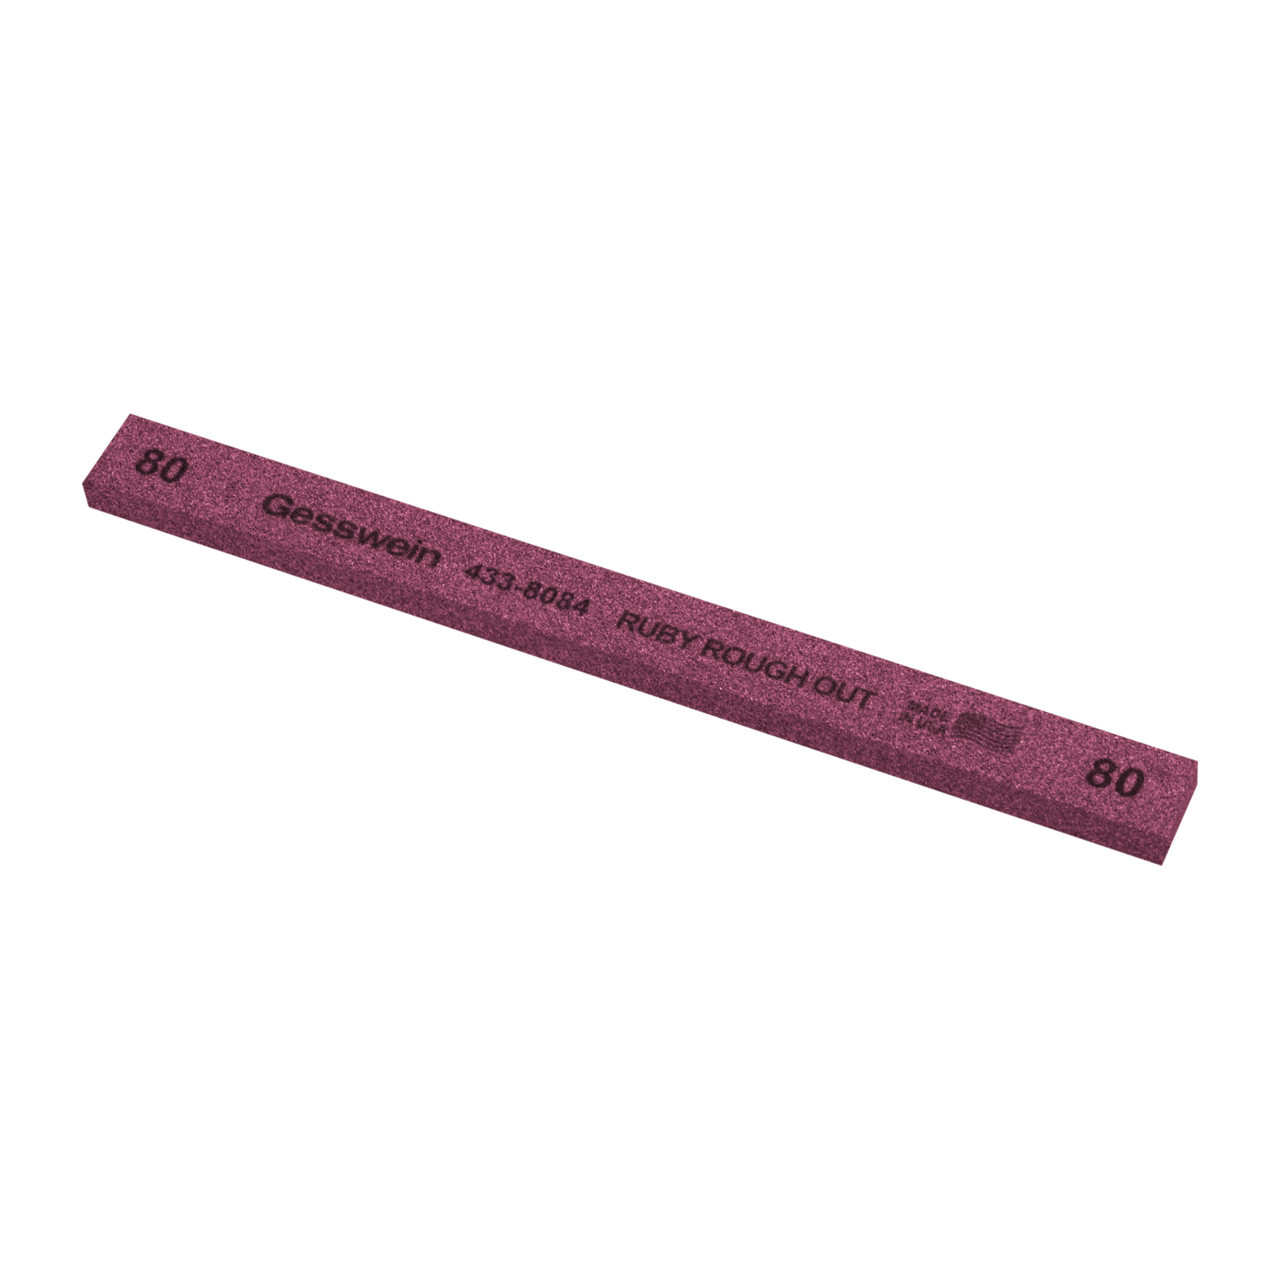 Gesswein® Ruby Rough Out Stone - 1/2" x 1/4" x 6", 80 Grit  (Pkg. of 12)